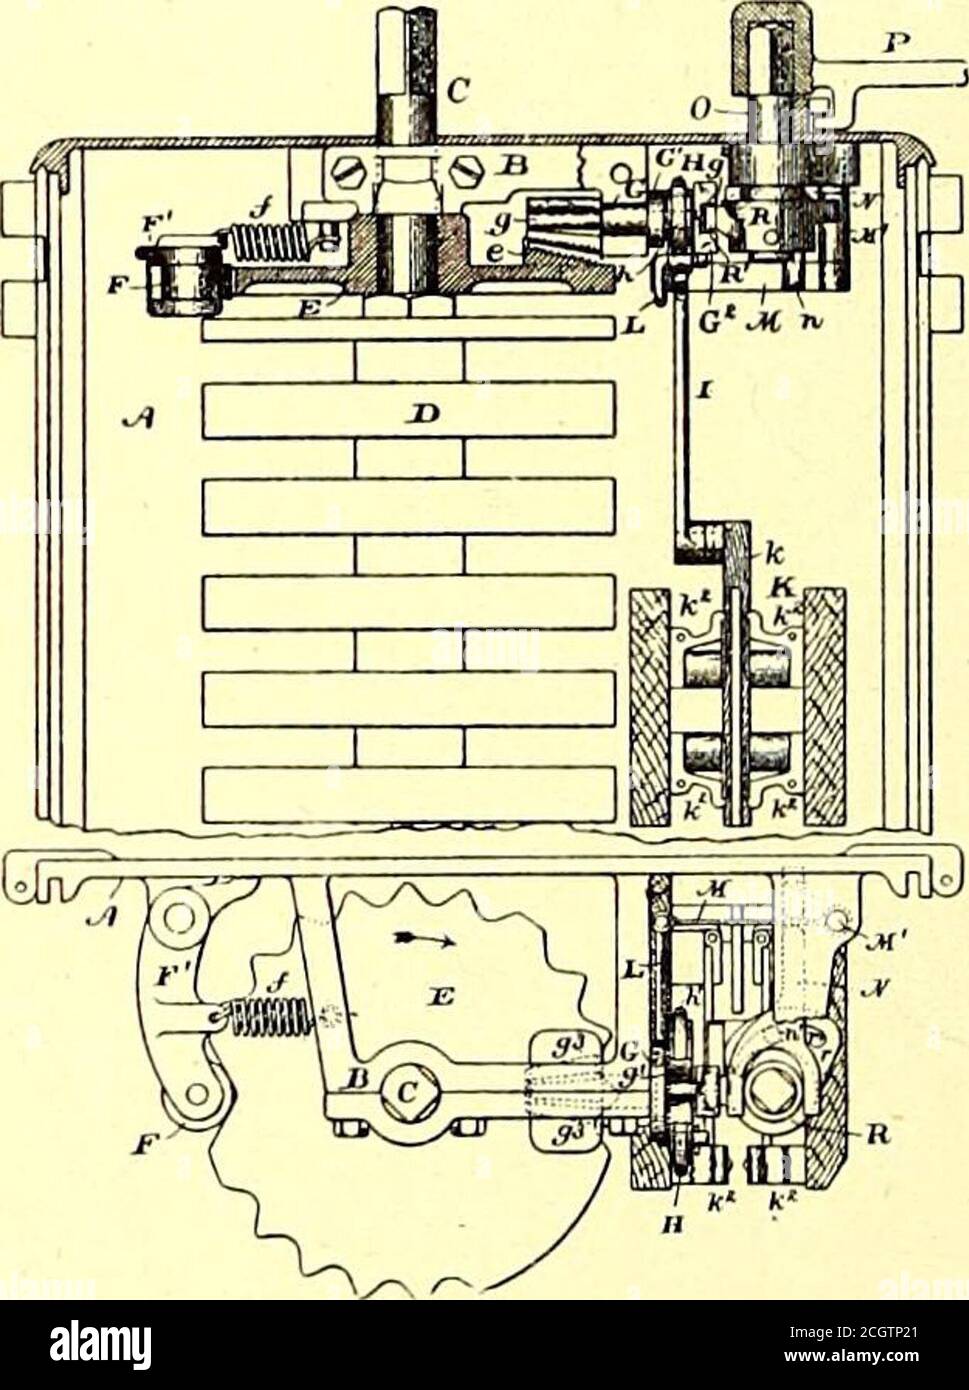 . The Street railway journal . hed by the Aultman-Taylor Machinery Company,Mansfield, O. Twenty-four pages. Illustrated. List of Street Railway Patents. U. S. Patents Issued June 16, 1896, to July 14,1896, Inclusive. Tune 16. Trolley.—John H. Holland and Peter F. Glazier, Indianapolis,Ind. No. 561,991. A trolley wheel in two sections divided horizontally and pivotedtogether so as to form a swivel construction and having ball bearingsbetween the meeting faces of the sections. Rail Bond or Connection.—H. P. Wellman, Catlettsburg, Ky.No. 562,055. A bond wire having iron or steel terminals and a c Stock Photo